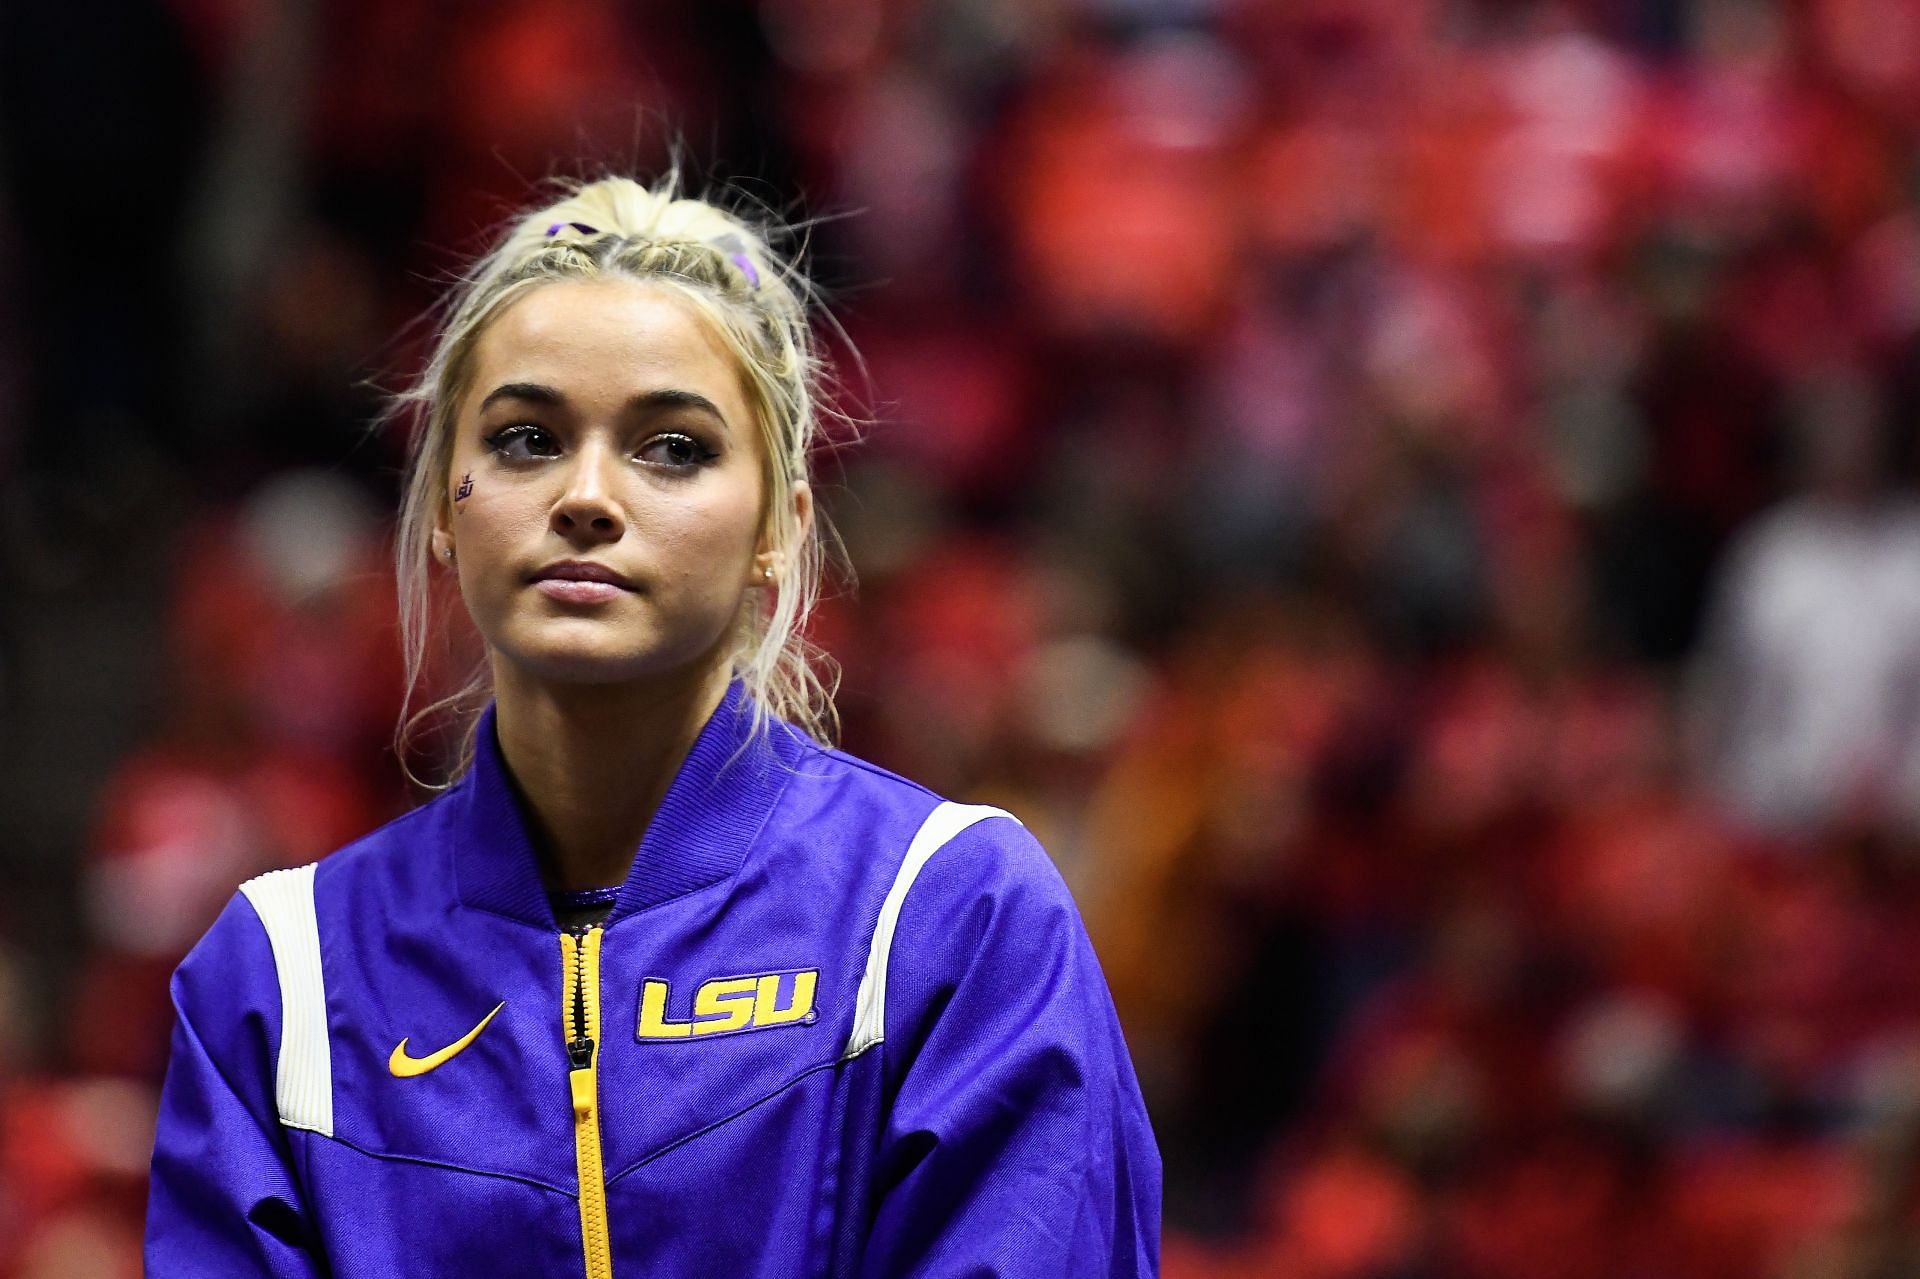 Olivia Dunne has recently hinted at the culmination of her gymnastics career as her final season with LSU comes to an end.